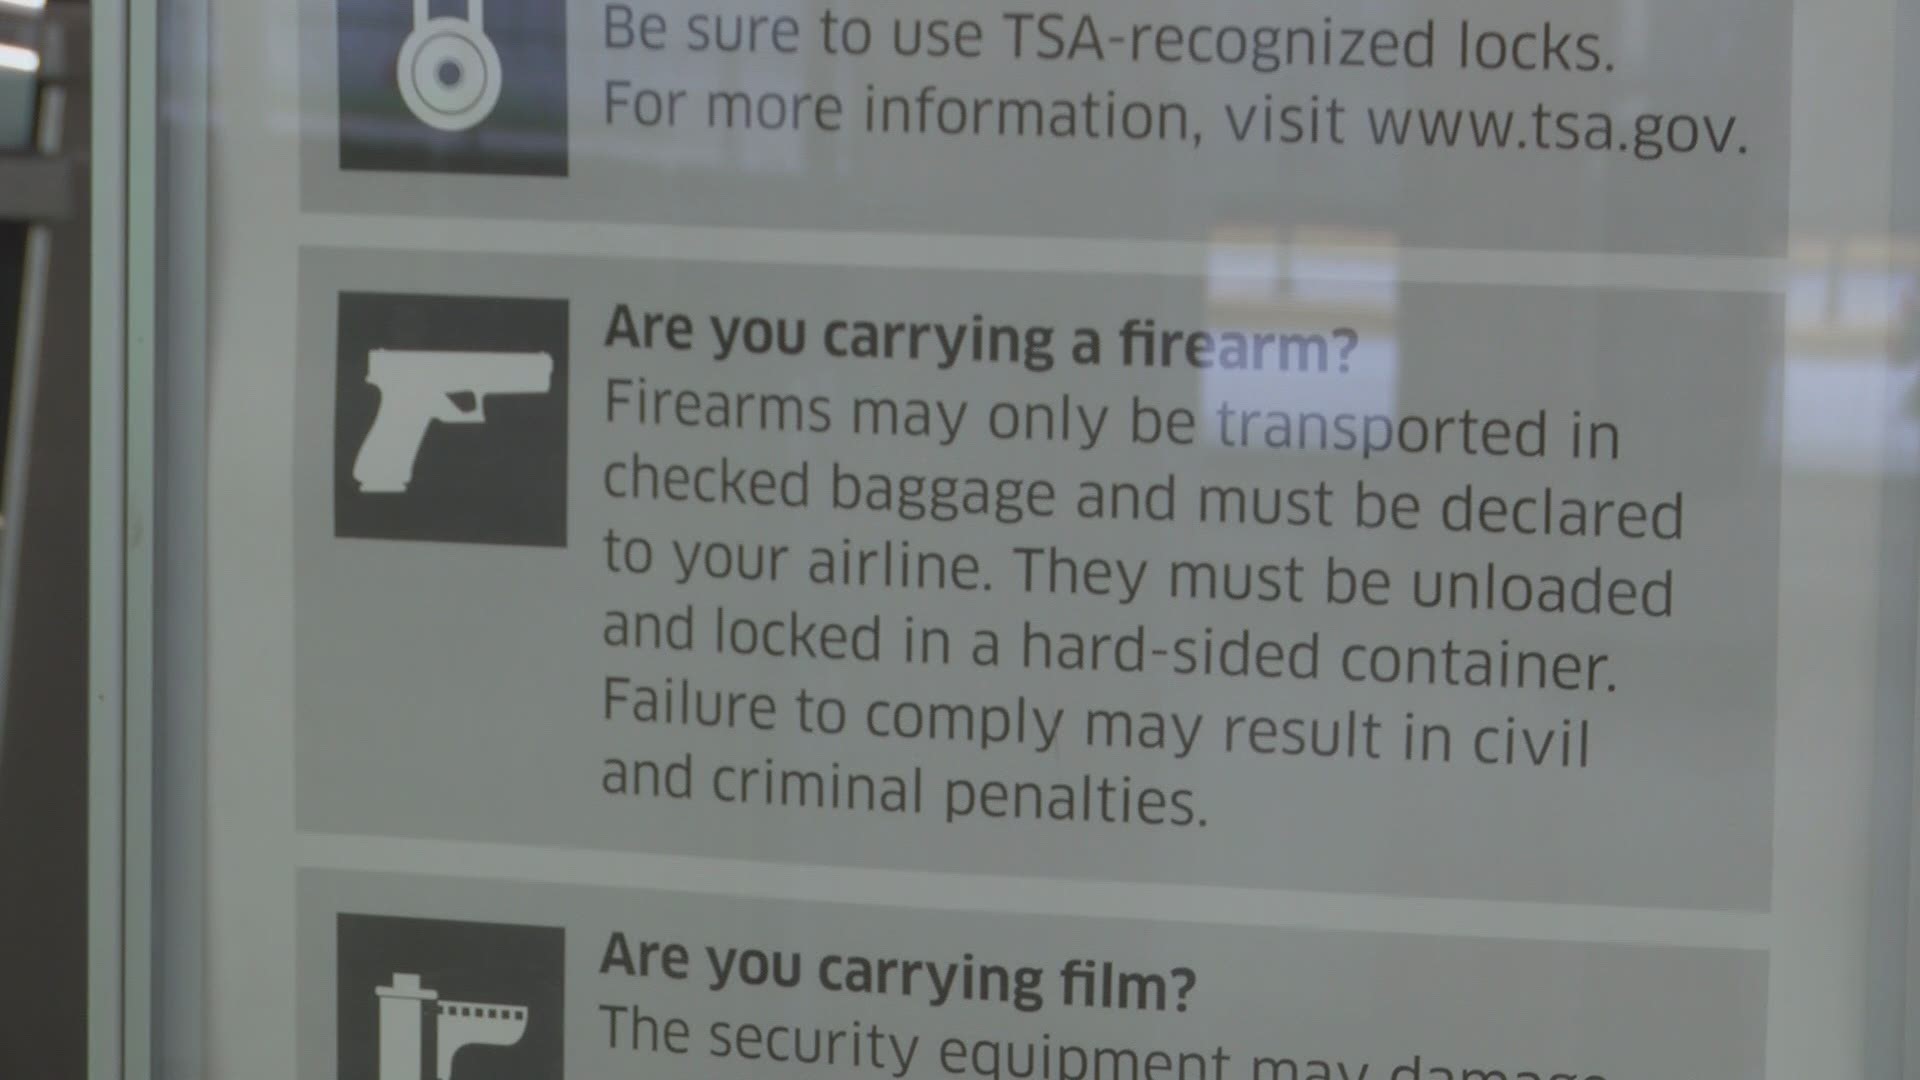 With gun sales on the rise, airports are also seeing an uptick of people traveling with them, and requirements for flying with guns safely aren't always being met.